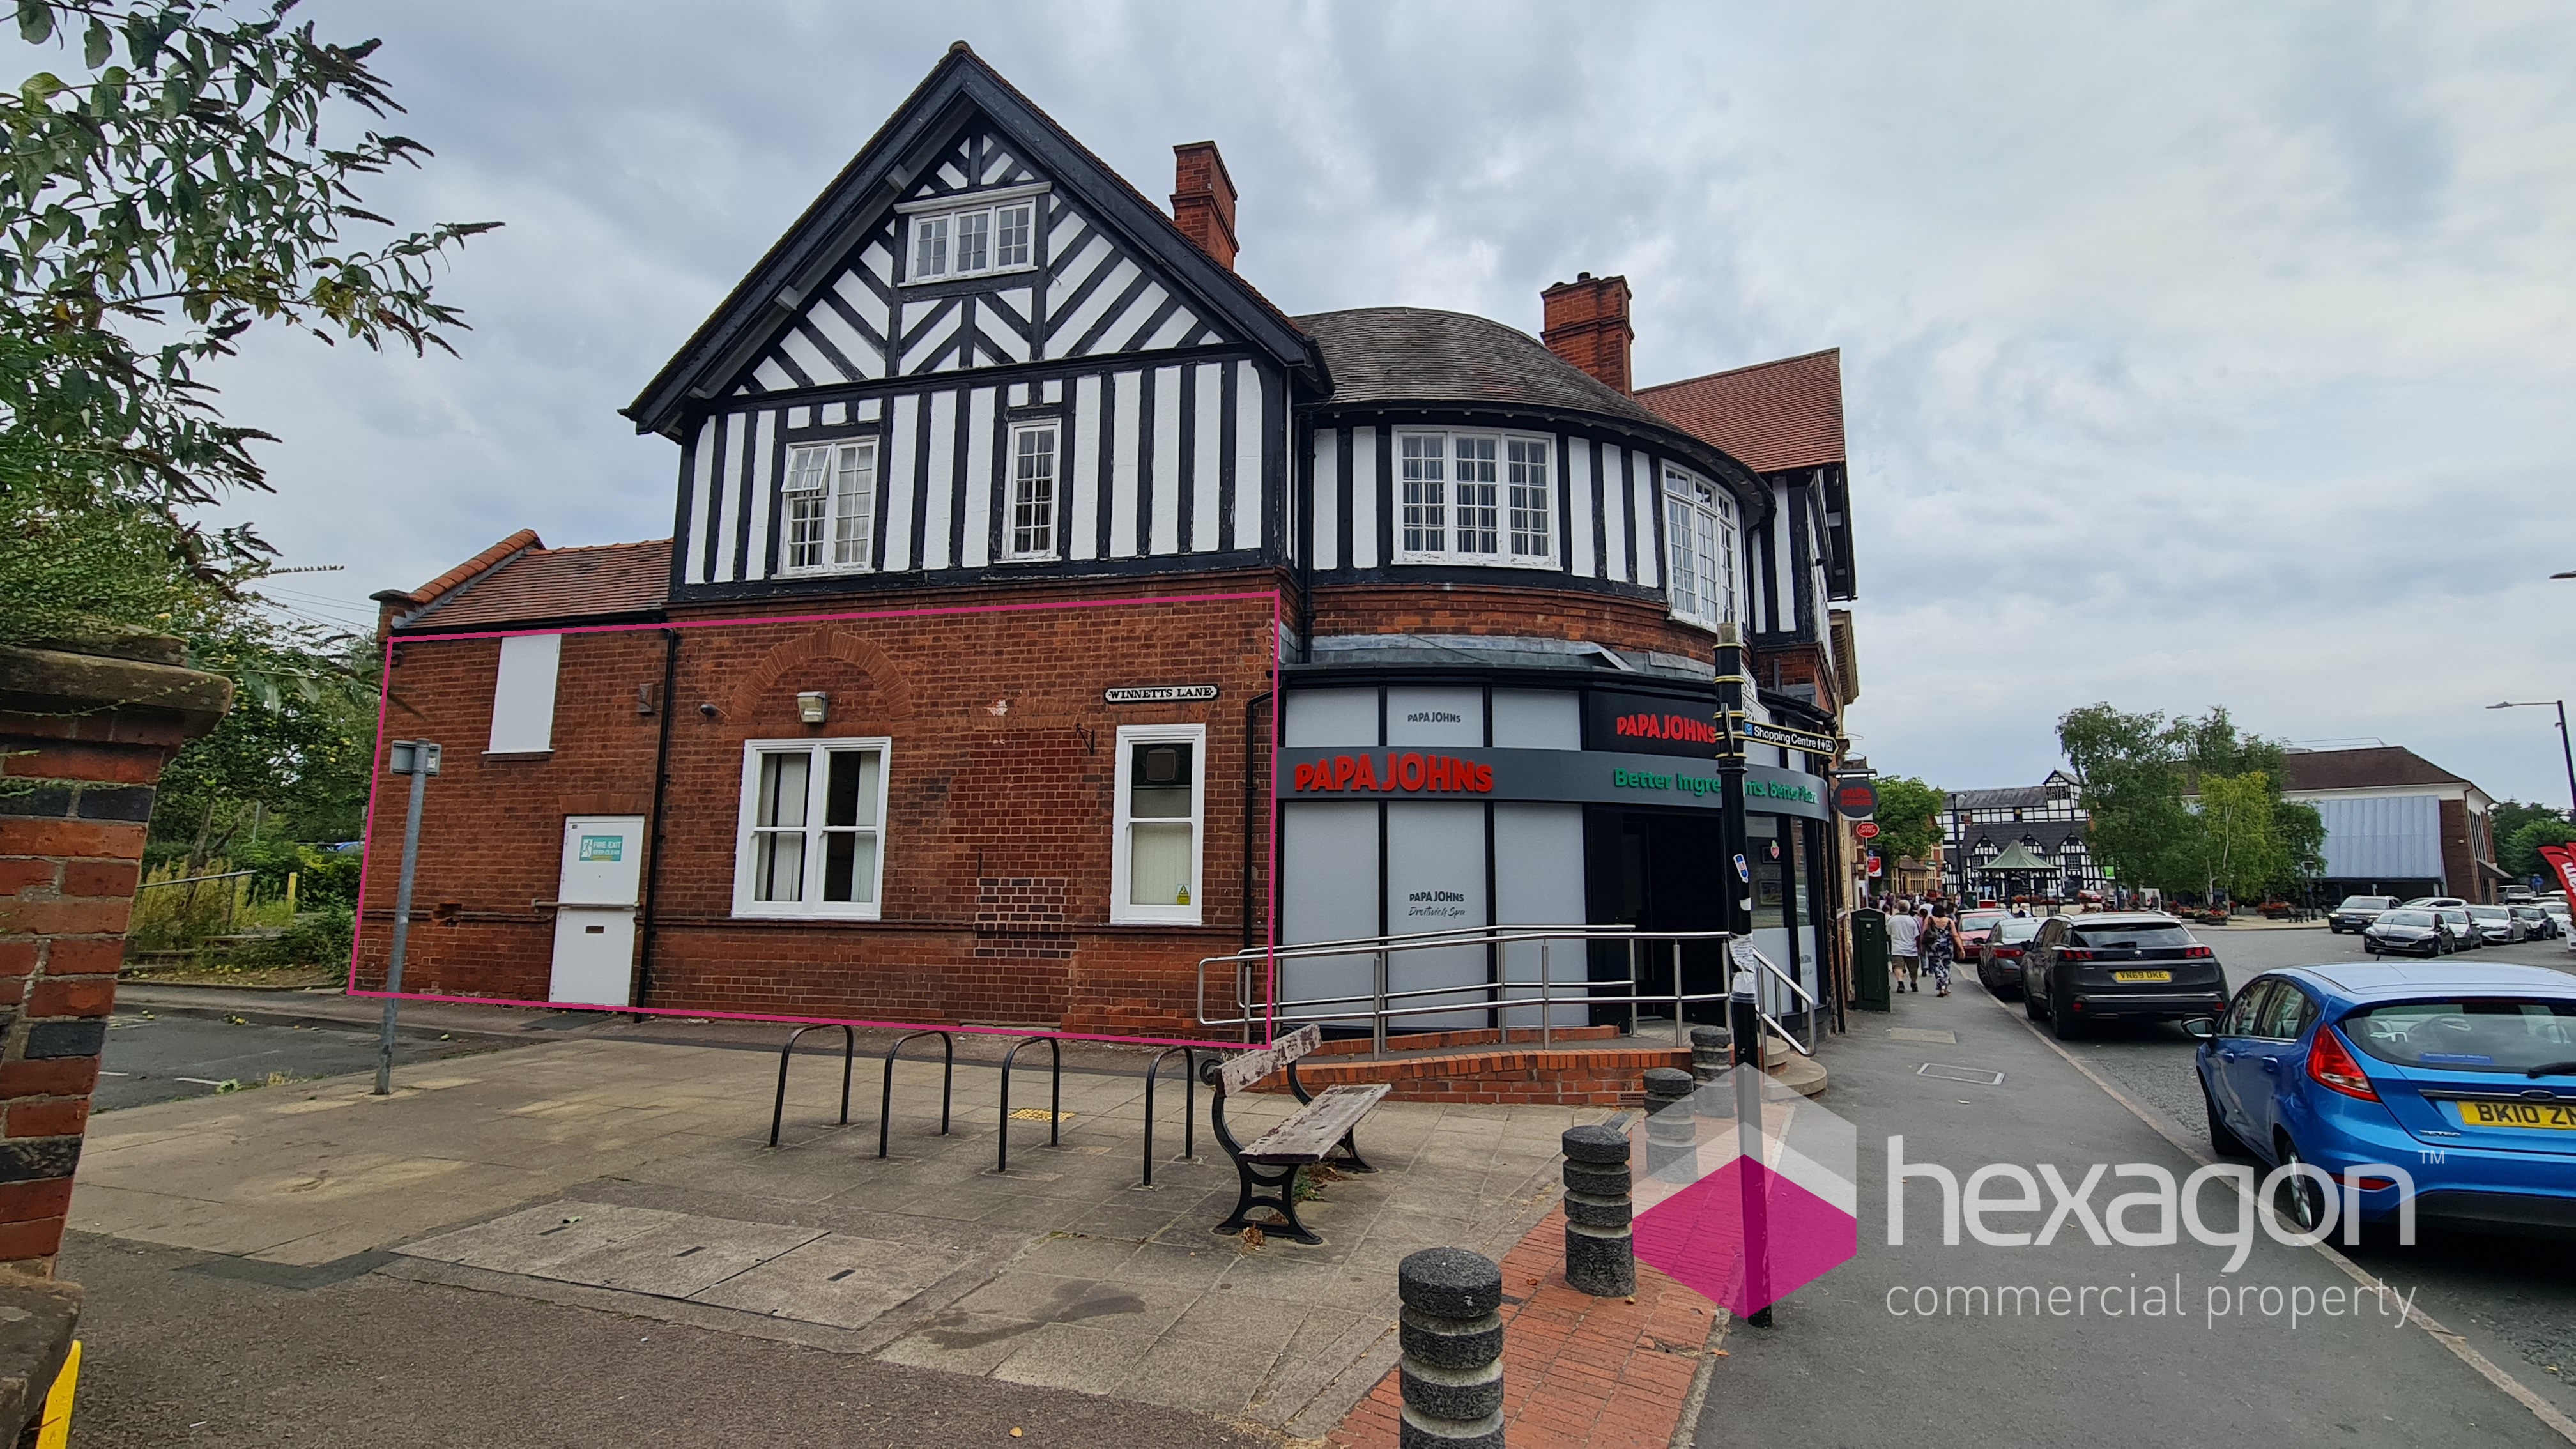 0 bed Retail Property (High Street) for rent in Droitwich. From Hexagon Commercial Property